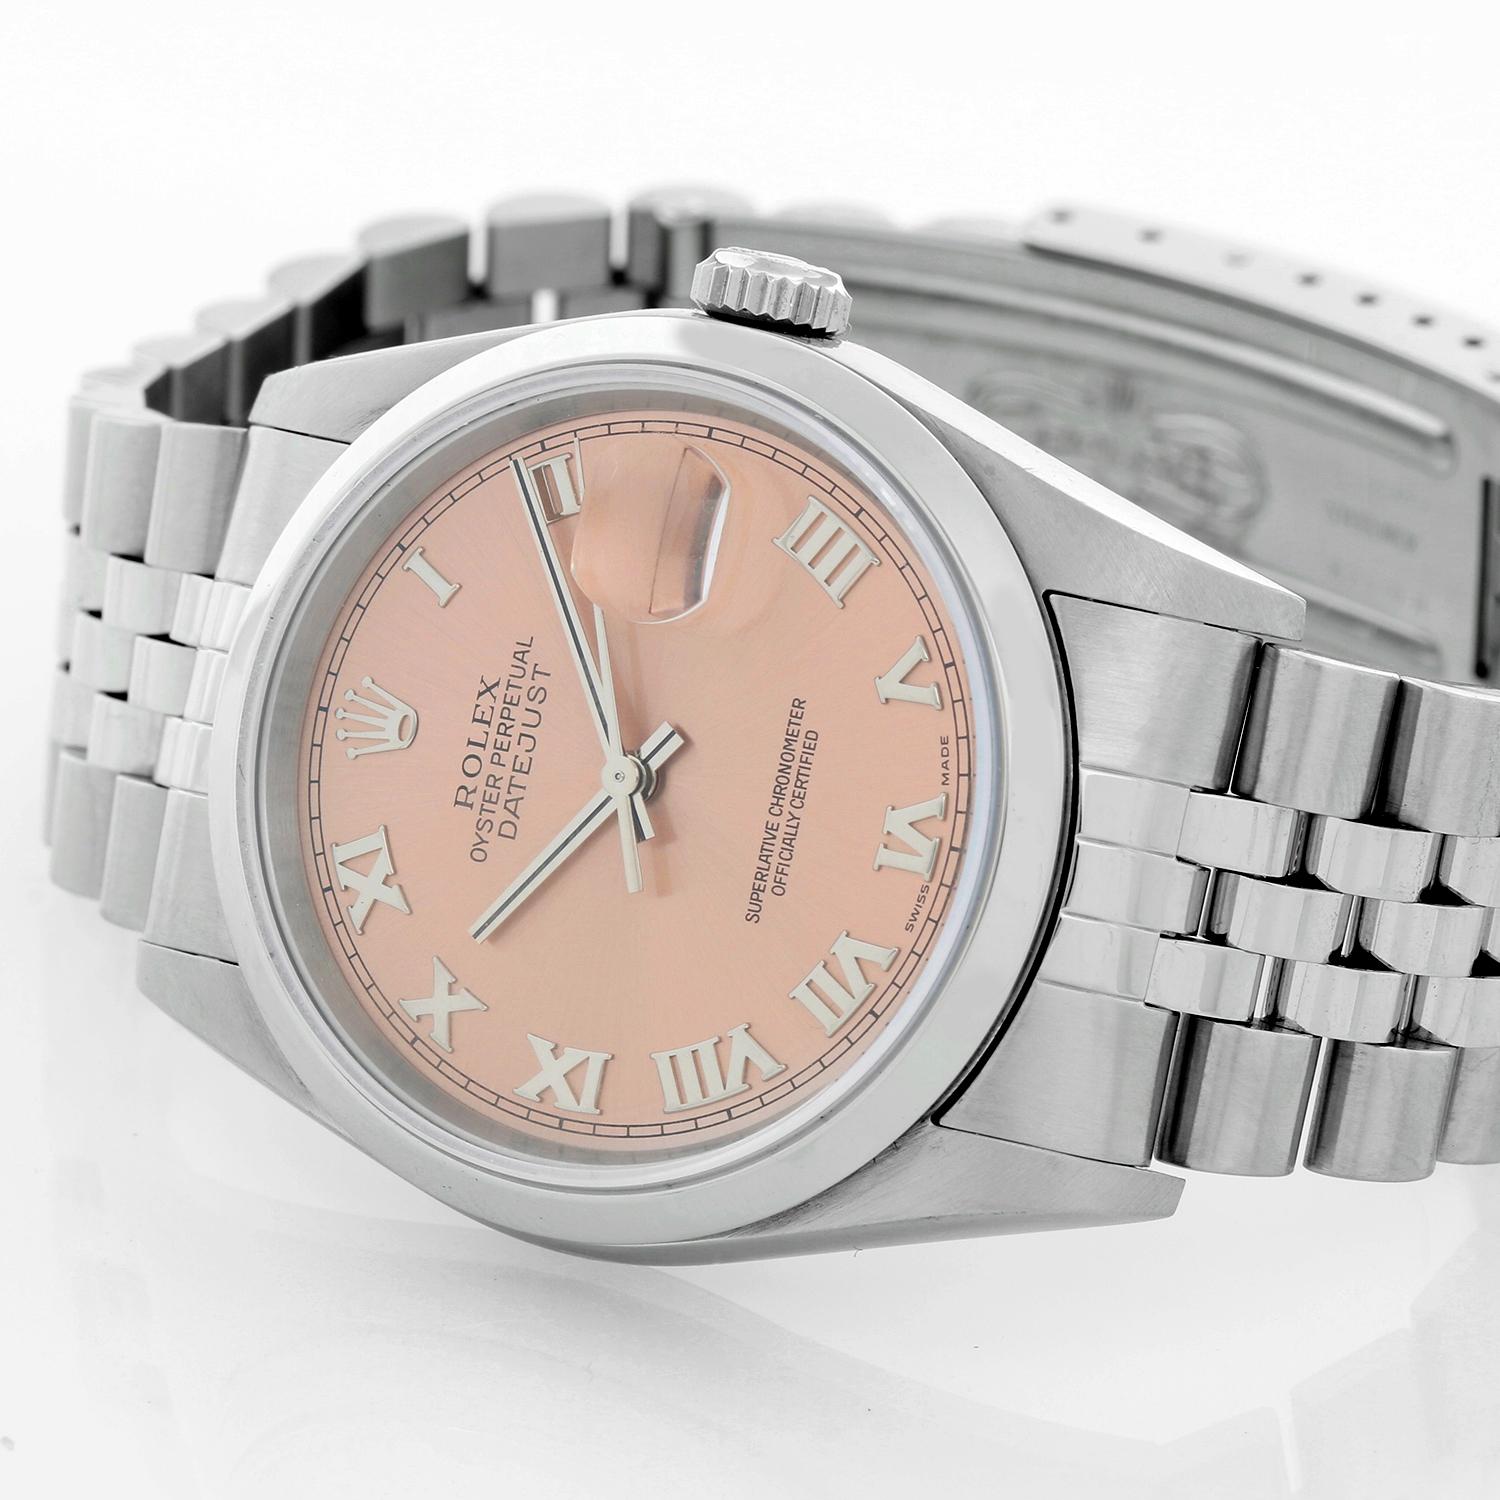 Rolex Datejust Men's Stainless Steel Automatic Winding Watch 16200 - Automatic winding, Quickset, sapphire crystal. Stainless steel case with smooth bezel (36mm diameter). Salmon dial with Roman numerals . Stainless Steel Jubilee bracelet .